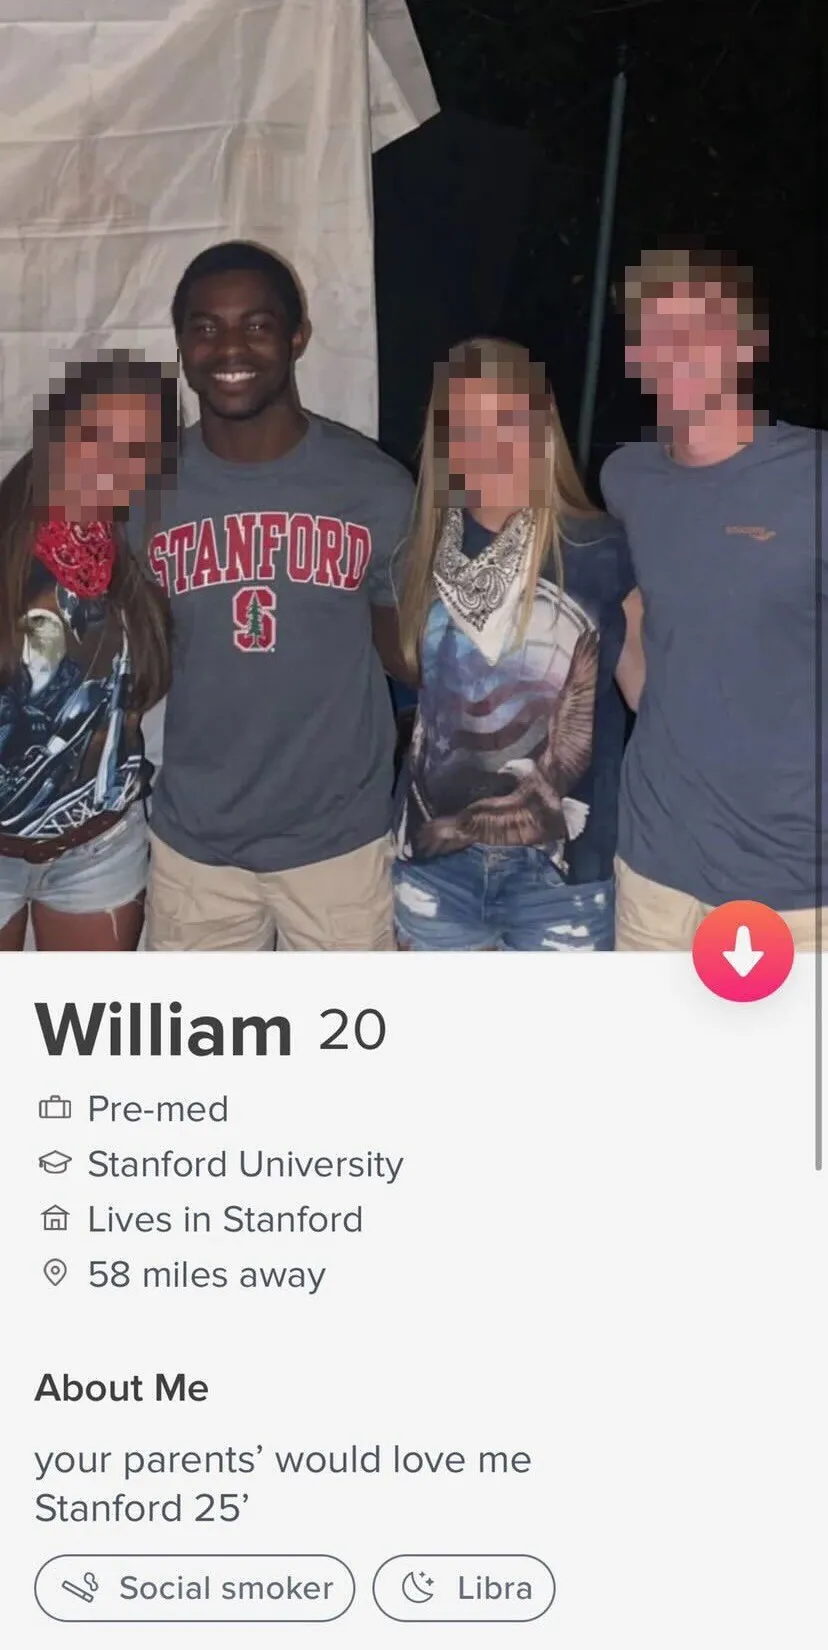 A Tinder profile for "William, 20, pre-med at Stanford." The profile says "your parents would love me." The photo shows Curry in a Stanford sweatshirt surrounded by others.